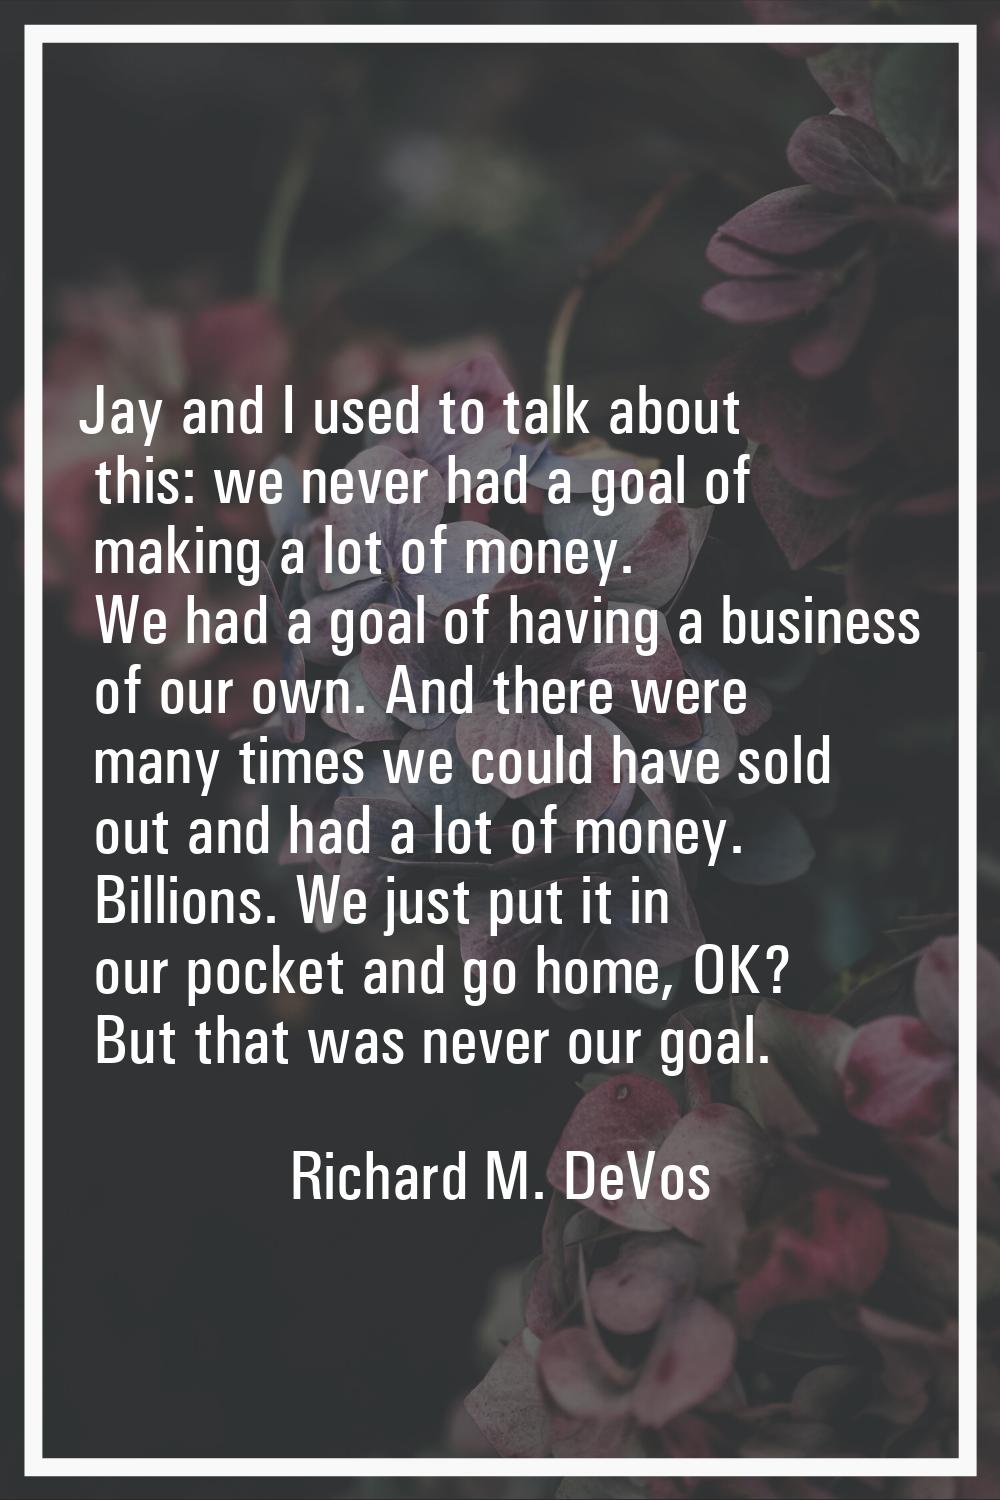 Jay and I used to talk about this: we never had a goal of making a lot of money. We had a goal of h